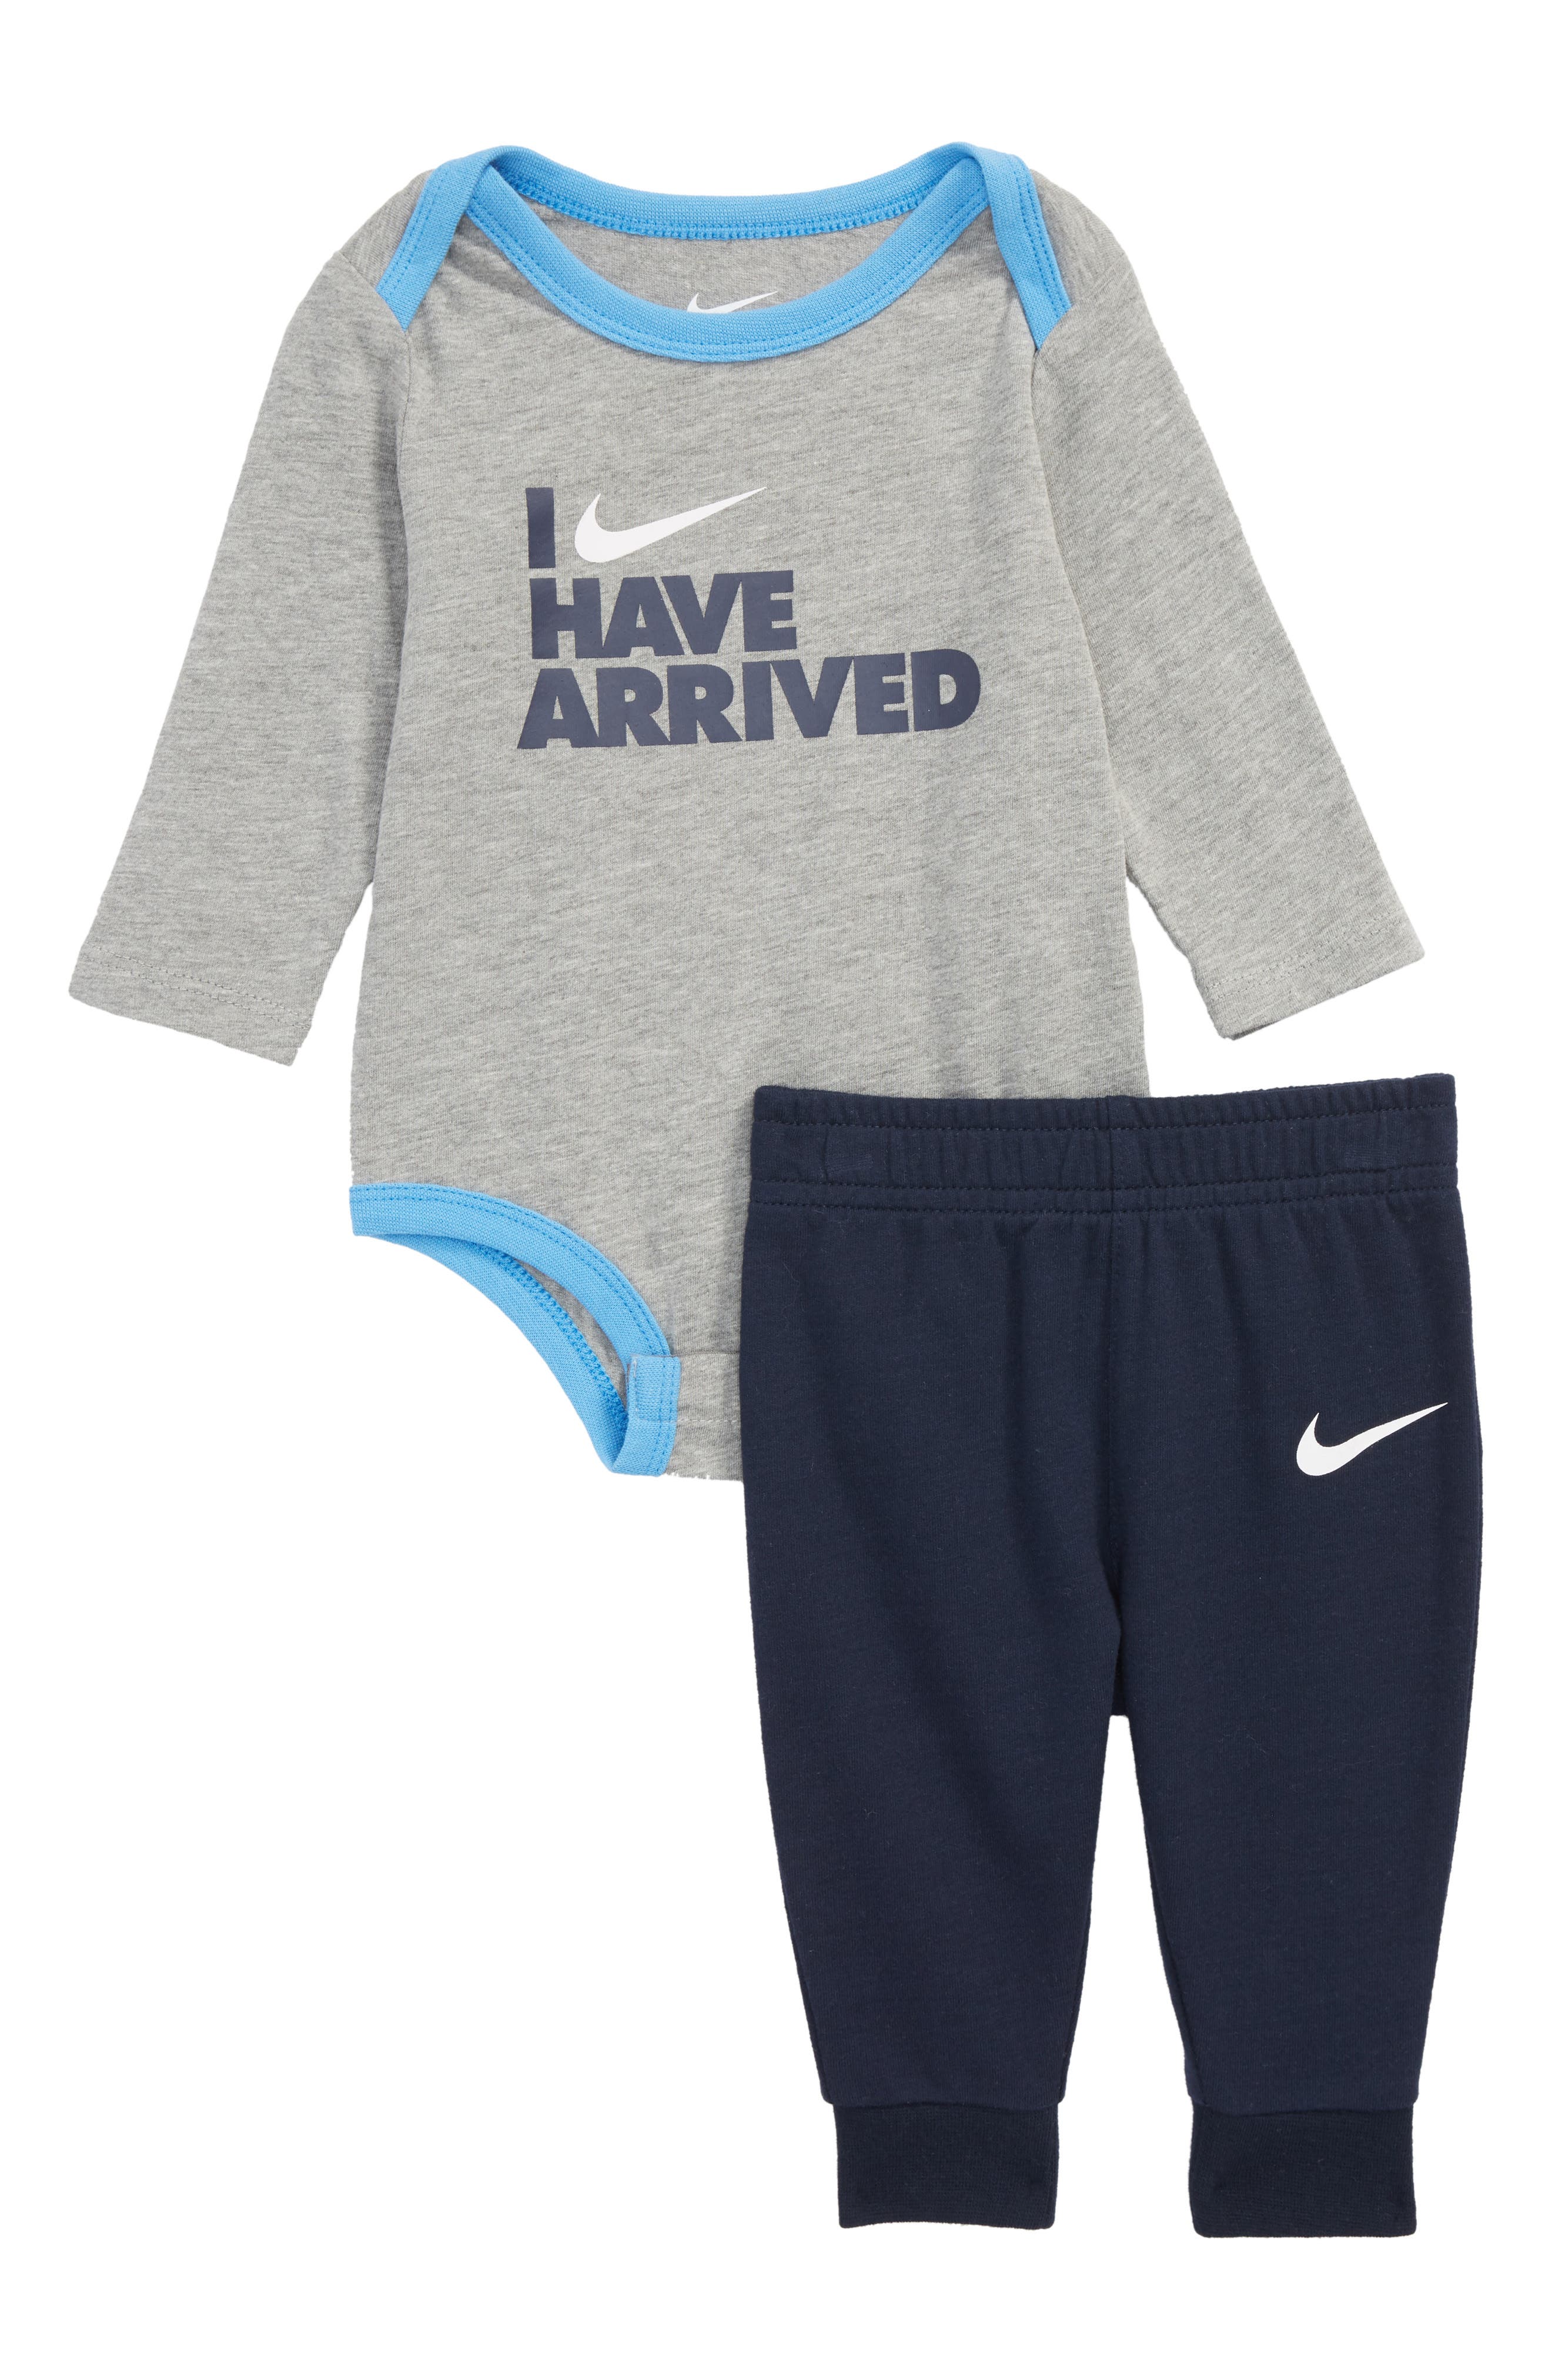 i have arrived nike baby outfit